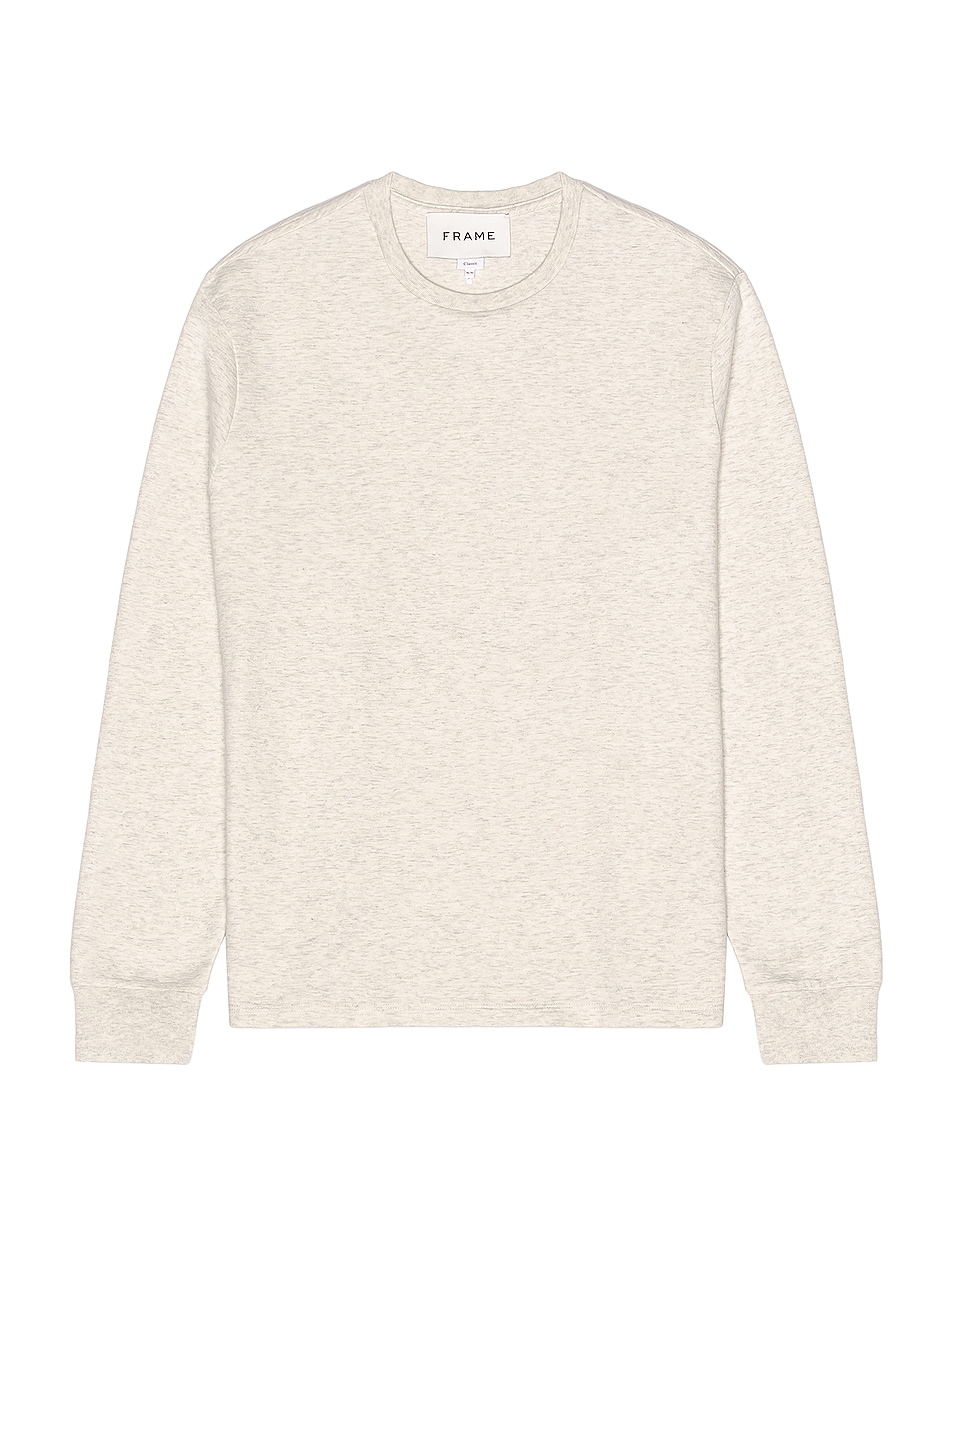 Image 1 of FRAME L/S Duofold Crew in Oatmeal Heather